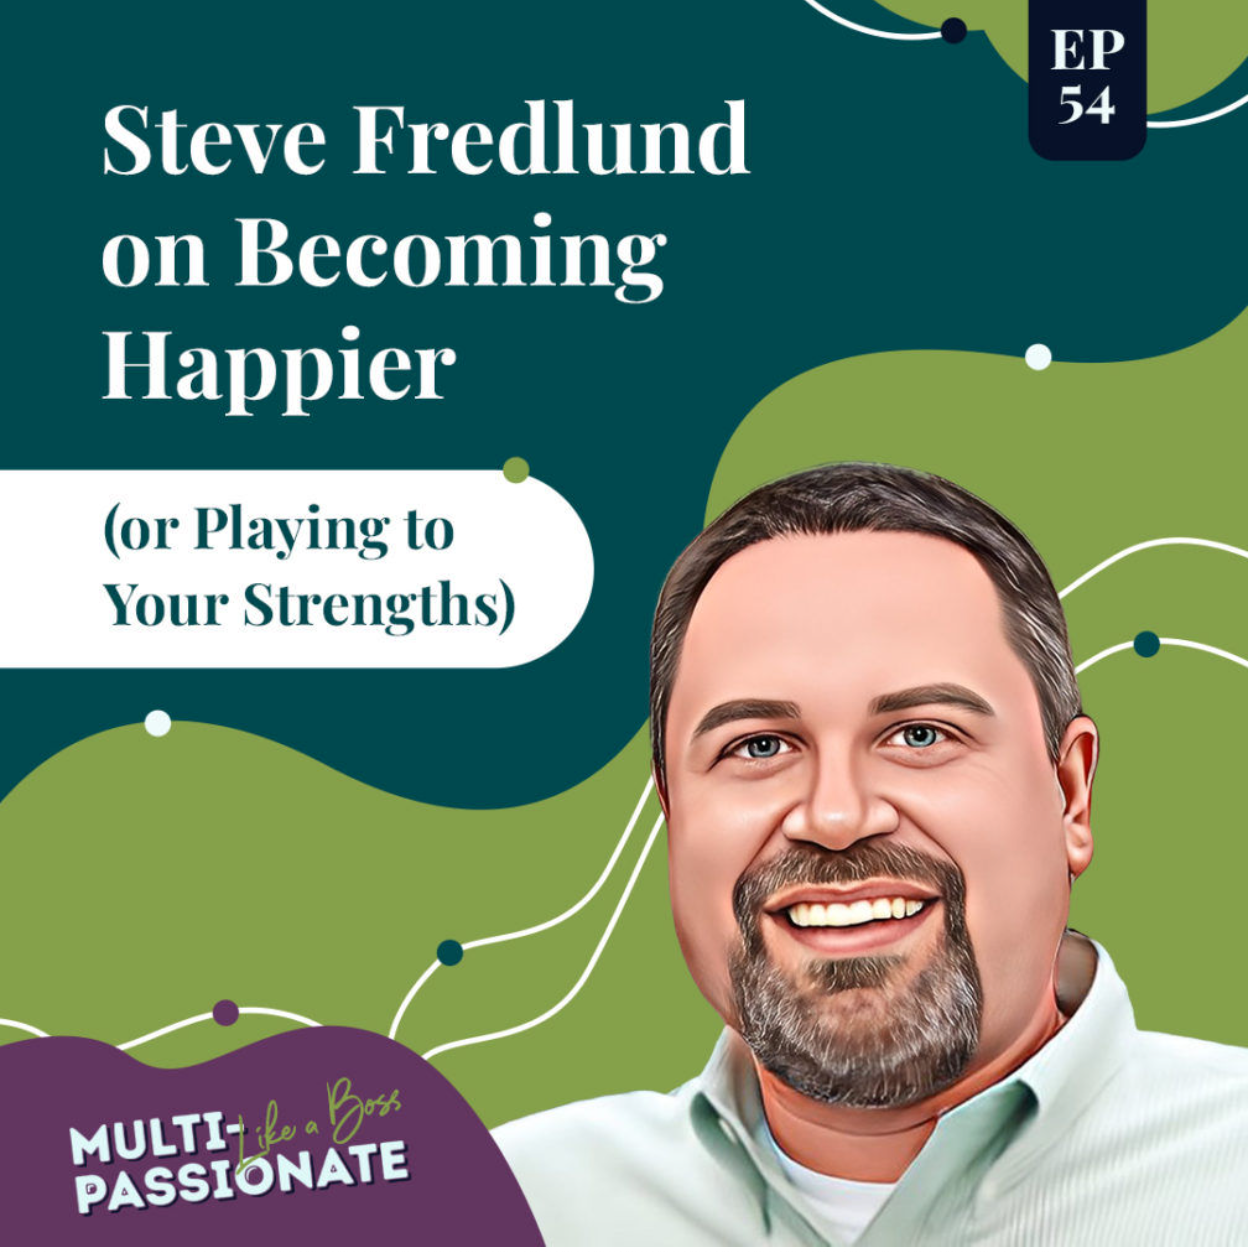 Caucasian man with a salt and pepper goatee on a green background next to a title that reads: Steve Fredlund on Becoming Happier (or Playing to Your Strengths)